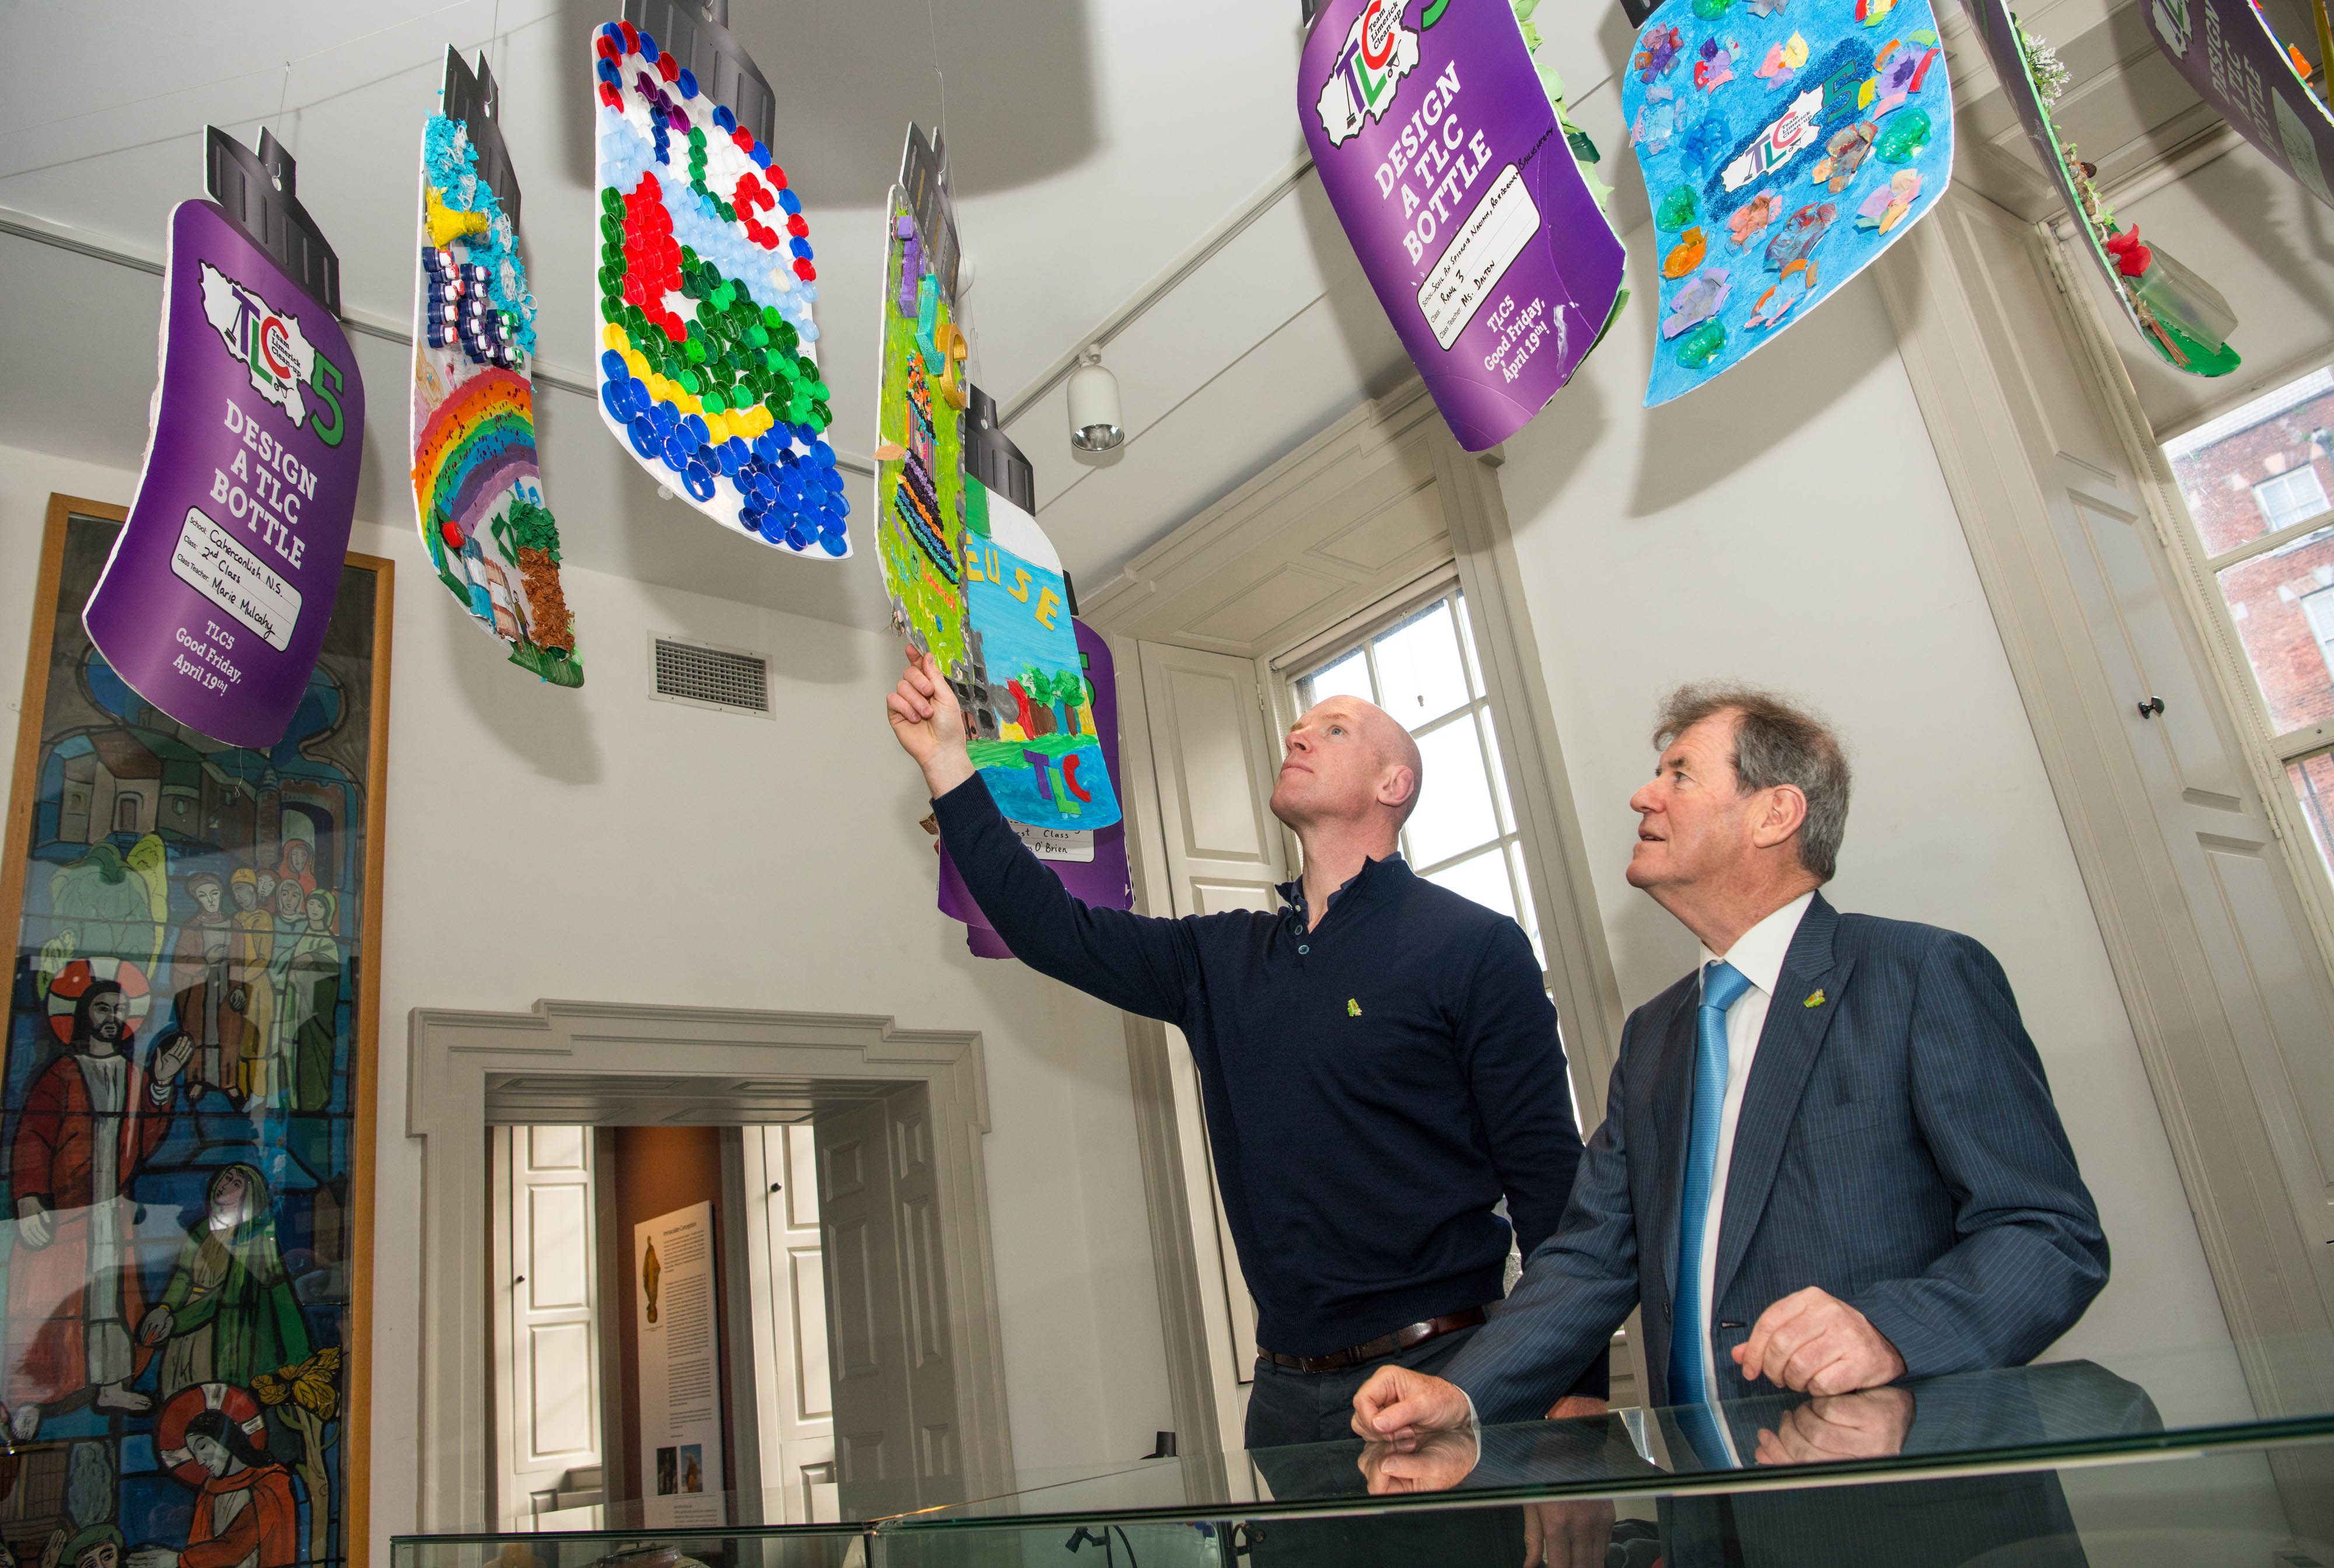 07/03/2019Paul O'Connell and JP McManus pictured today at the 'Design a TLC Bottle' prizegiving at the Hunt Museum, Limerick. Over 50 primary schools across the county entered ahead of Team Limerick Clean-Up 5, which will see thousands of volunteers take to the streets of Limerick city and county for Europe's largest one-day clean up. Sponsored by the JP McManus Benevolent Fund, the event has seen over 360 tonnes of litter gathered from the streets since inception in 2015. Over 14,000 volunteers have already signed up for the 2019 event, taking place on Good Friday, 19th April. Photo by Diarmuid Greene